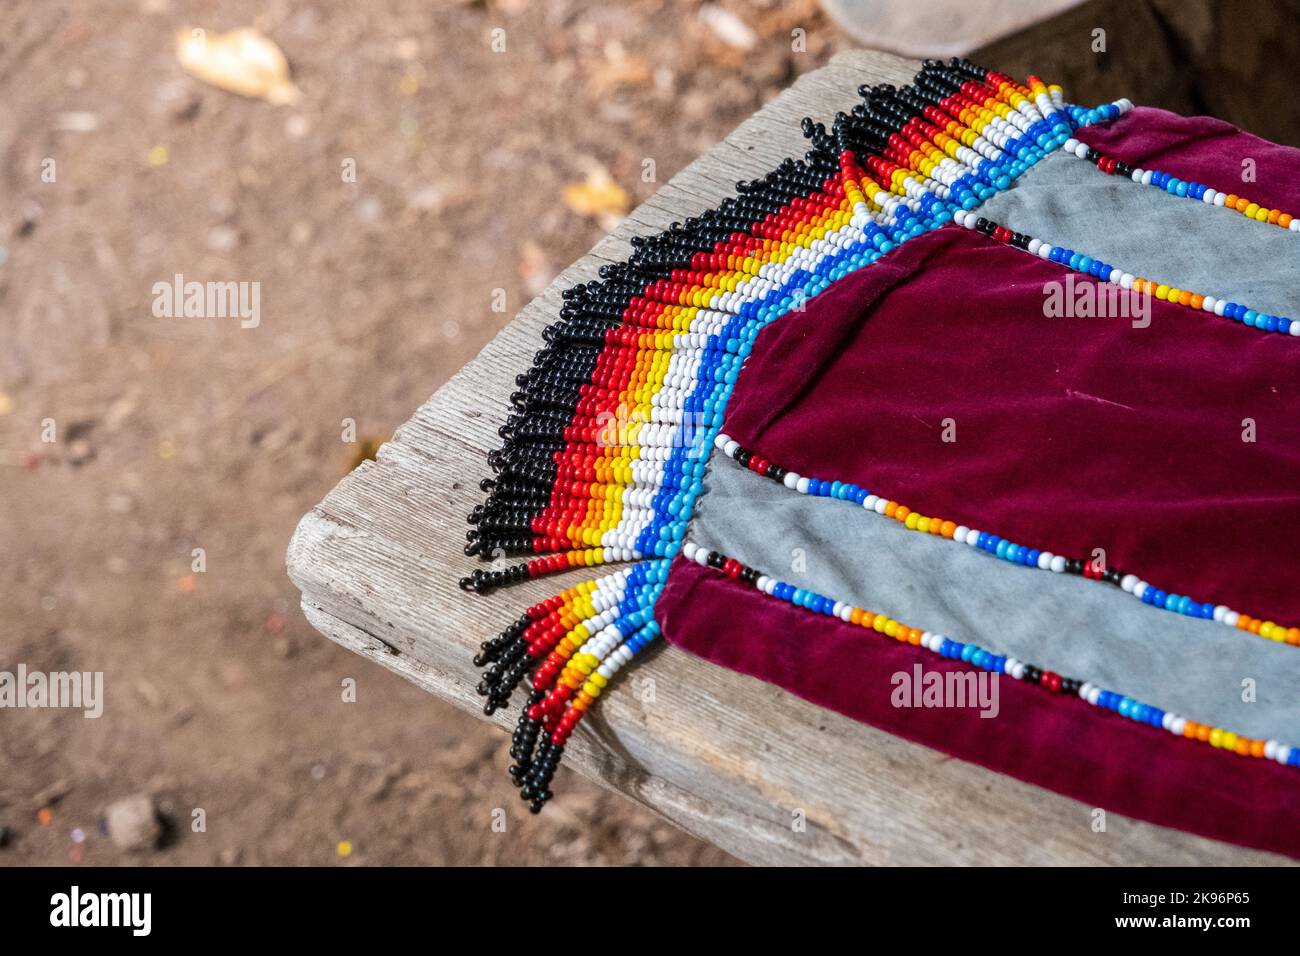 Colorful native American beadwork has been added to a crimson, velvet scarf. Stock Photo